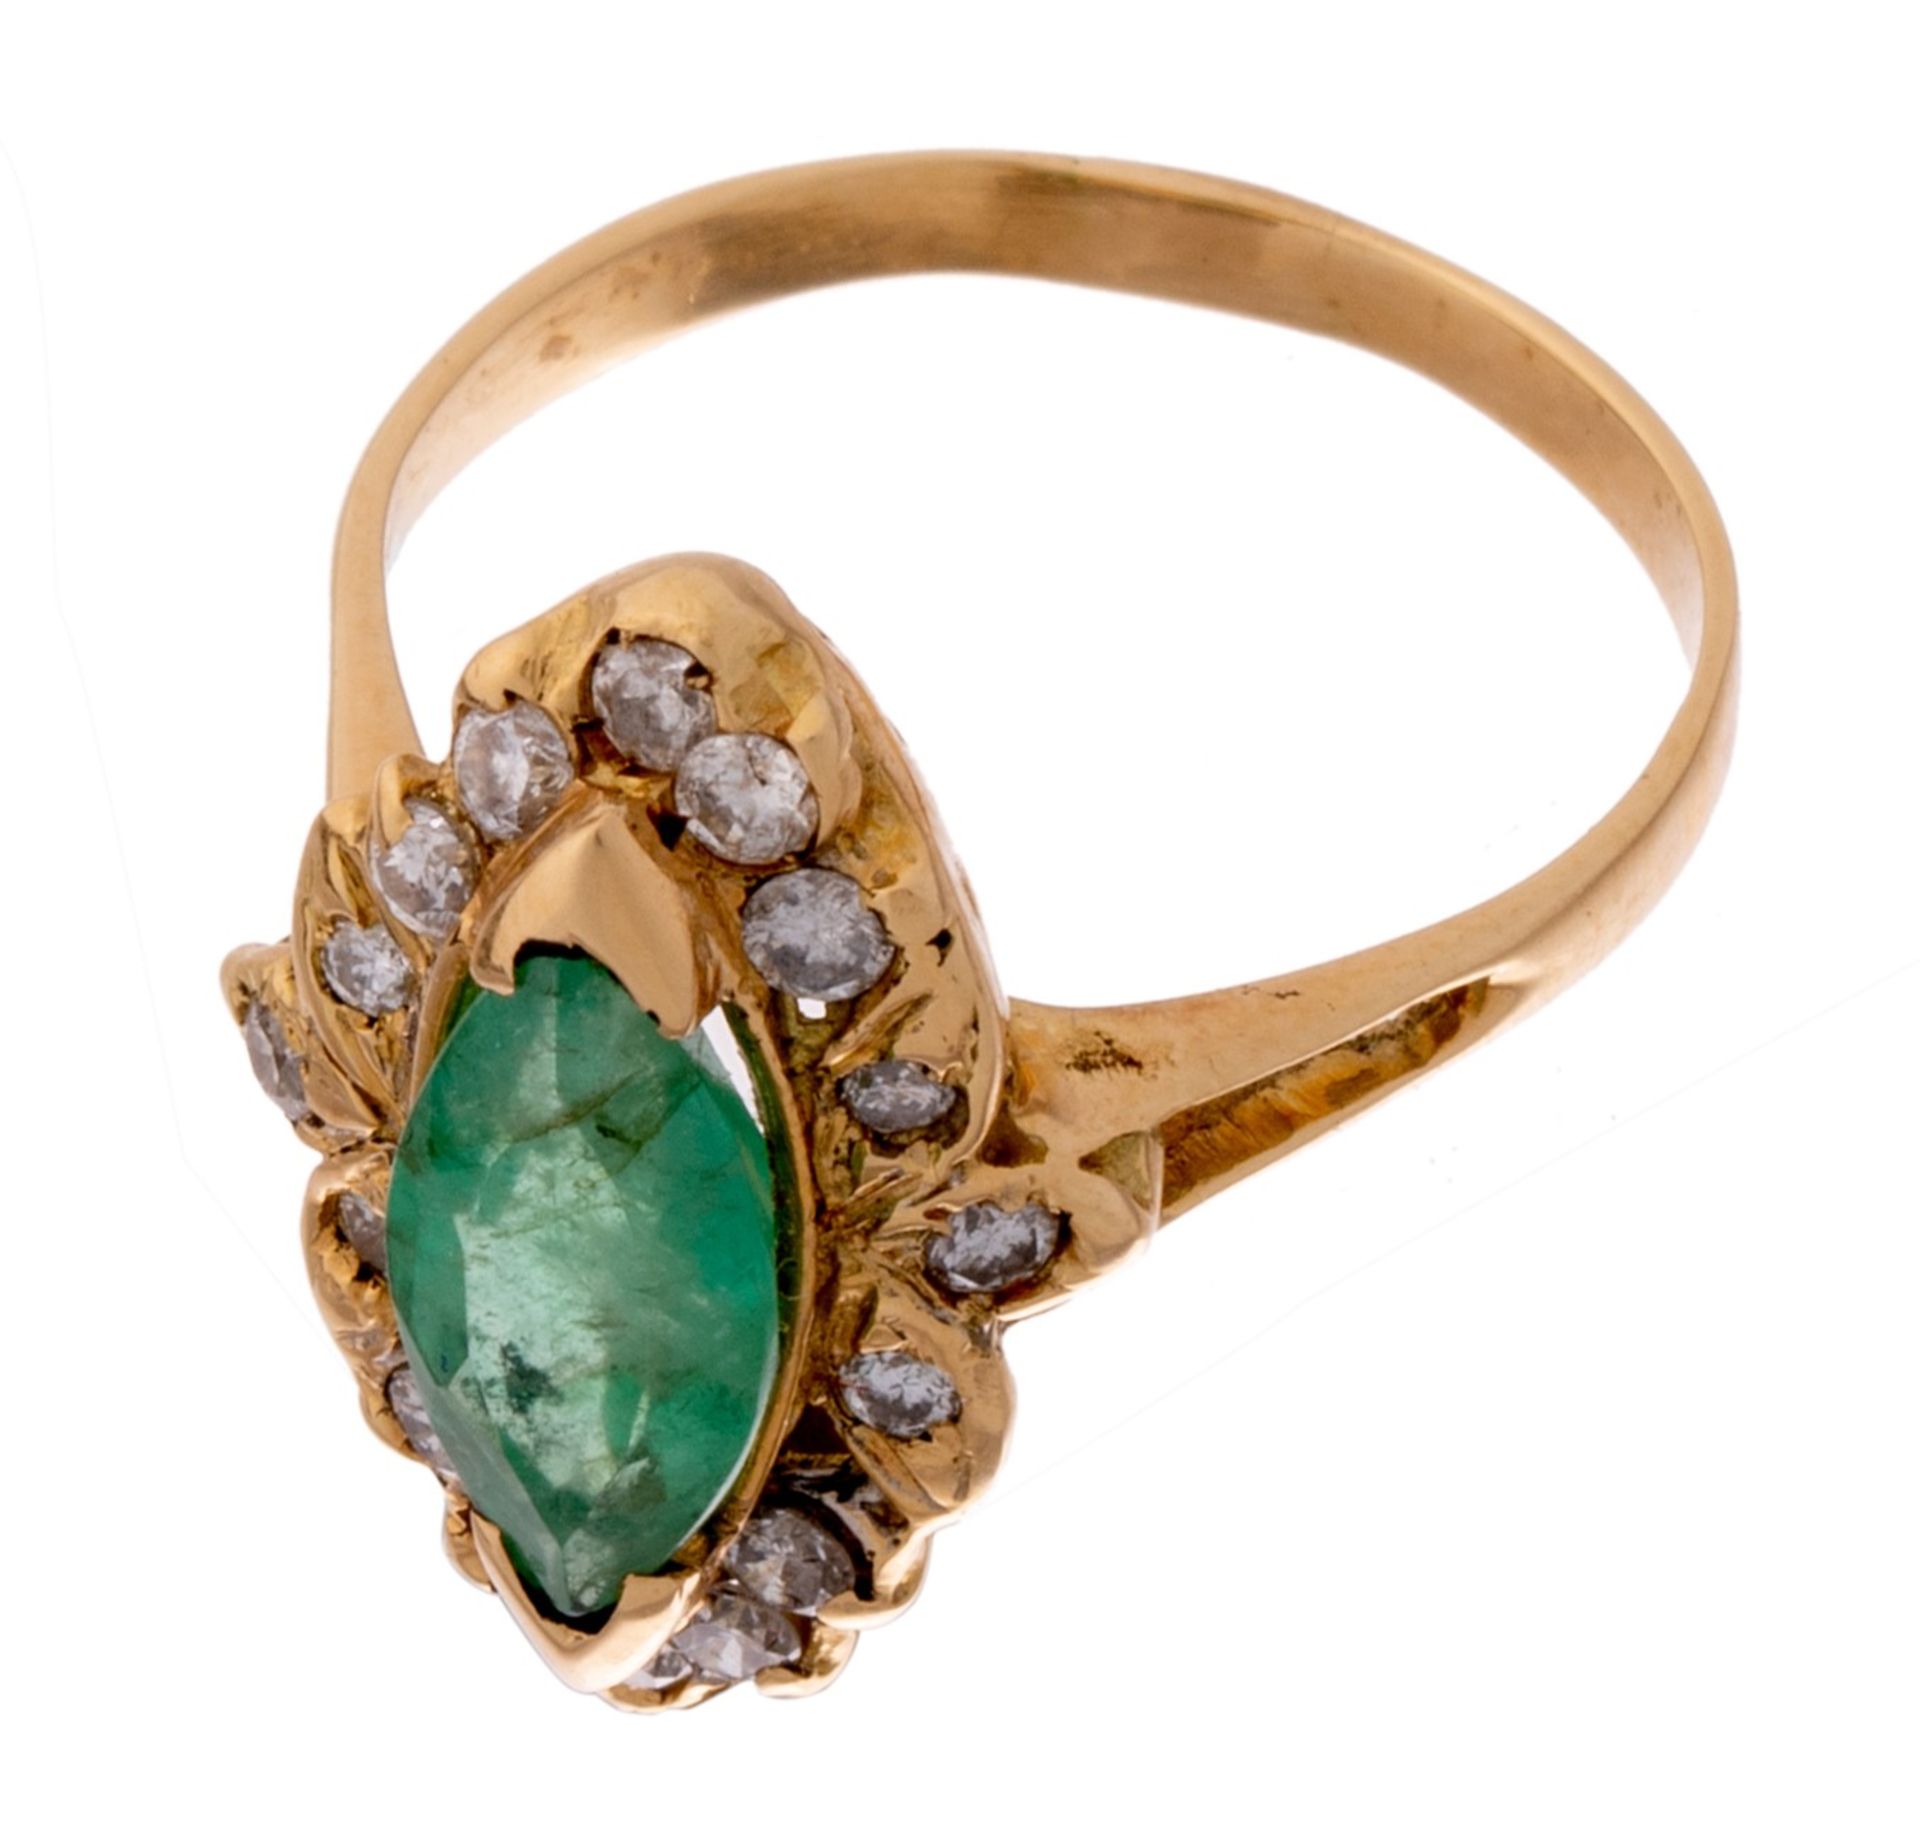 A ring in 18ct yellow gold, set with a marquise cut emerald and 16 brilliant cut diamonds, 5,5 g - Image 2 of 4